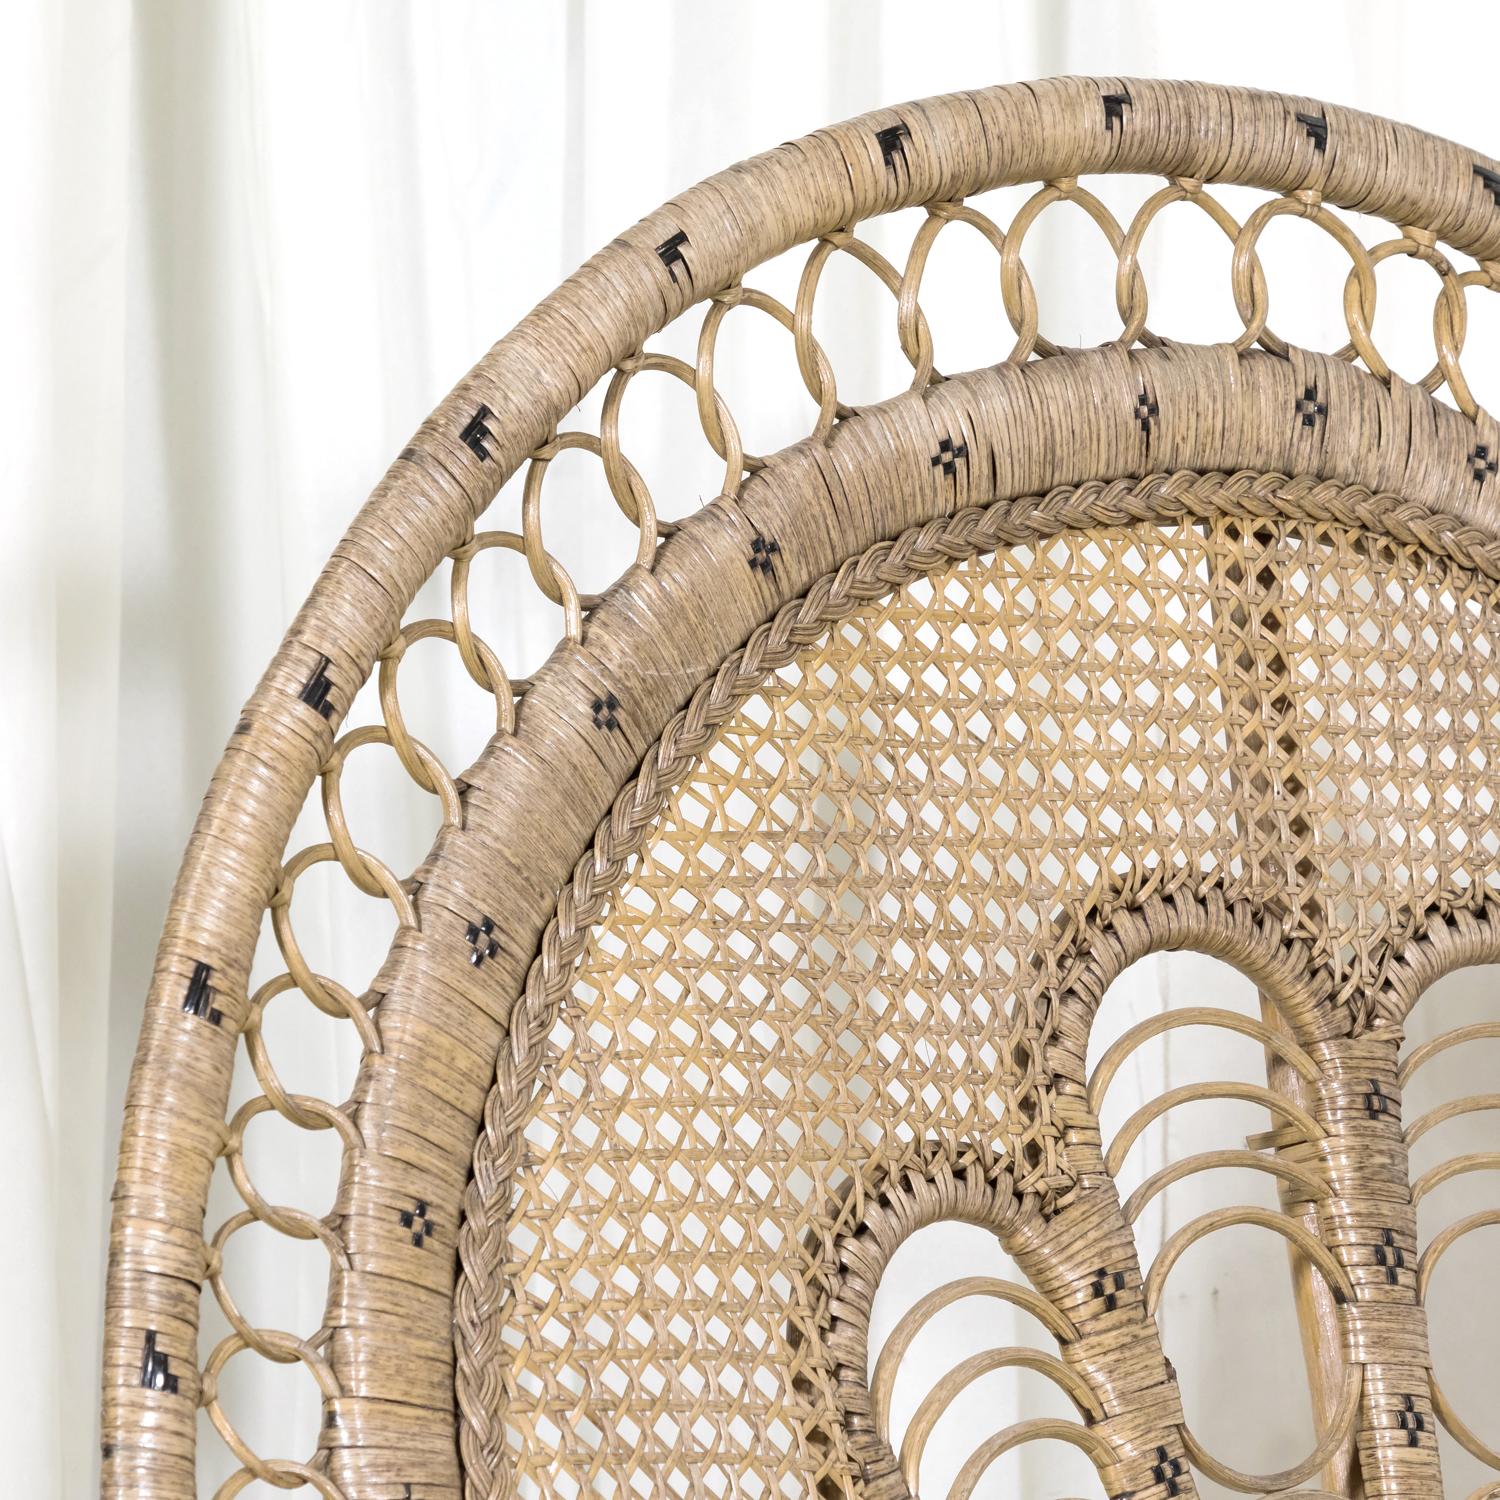 Rare 1930s French Wicker Rattan Emmanuelle Peacock Chair For Sale 7